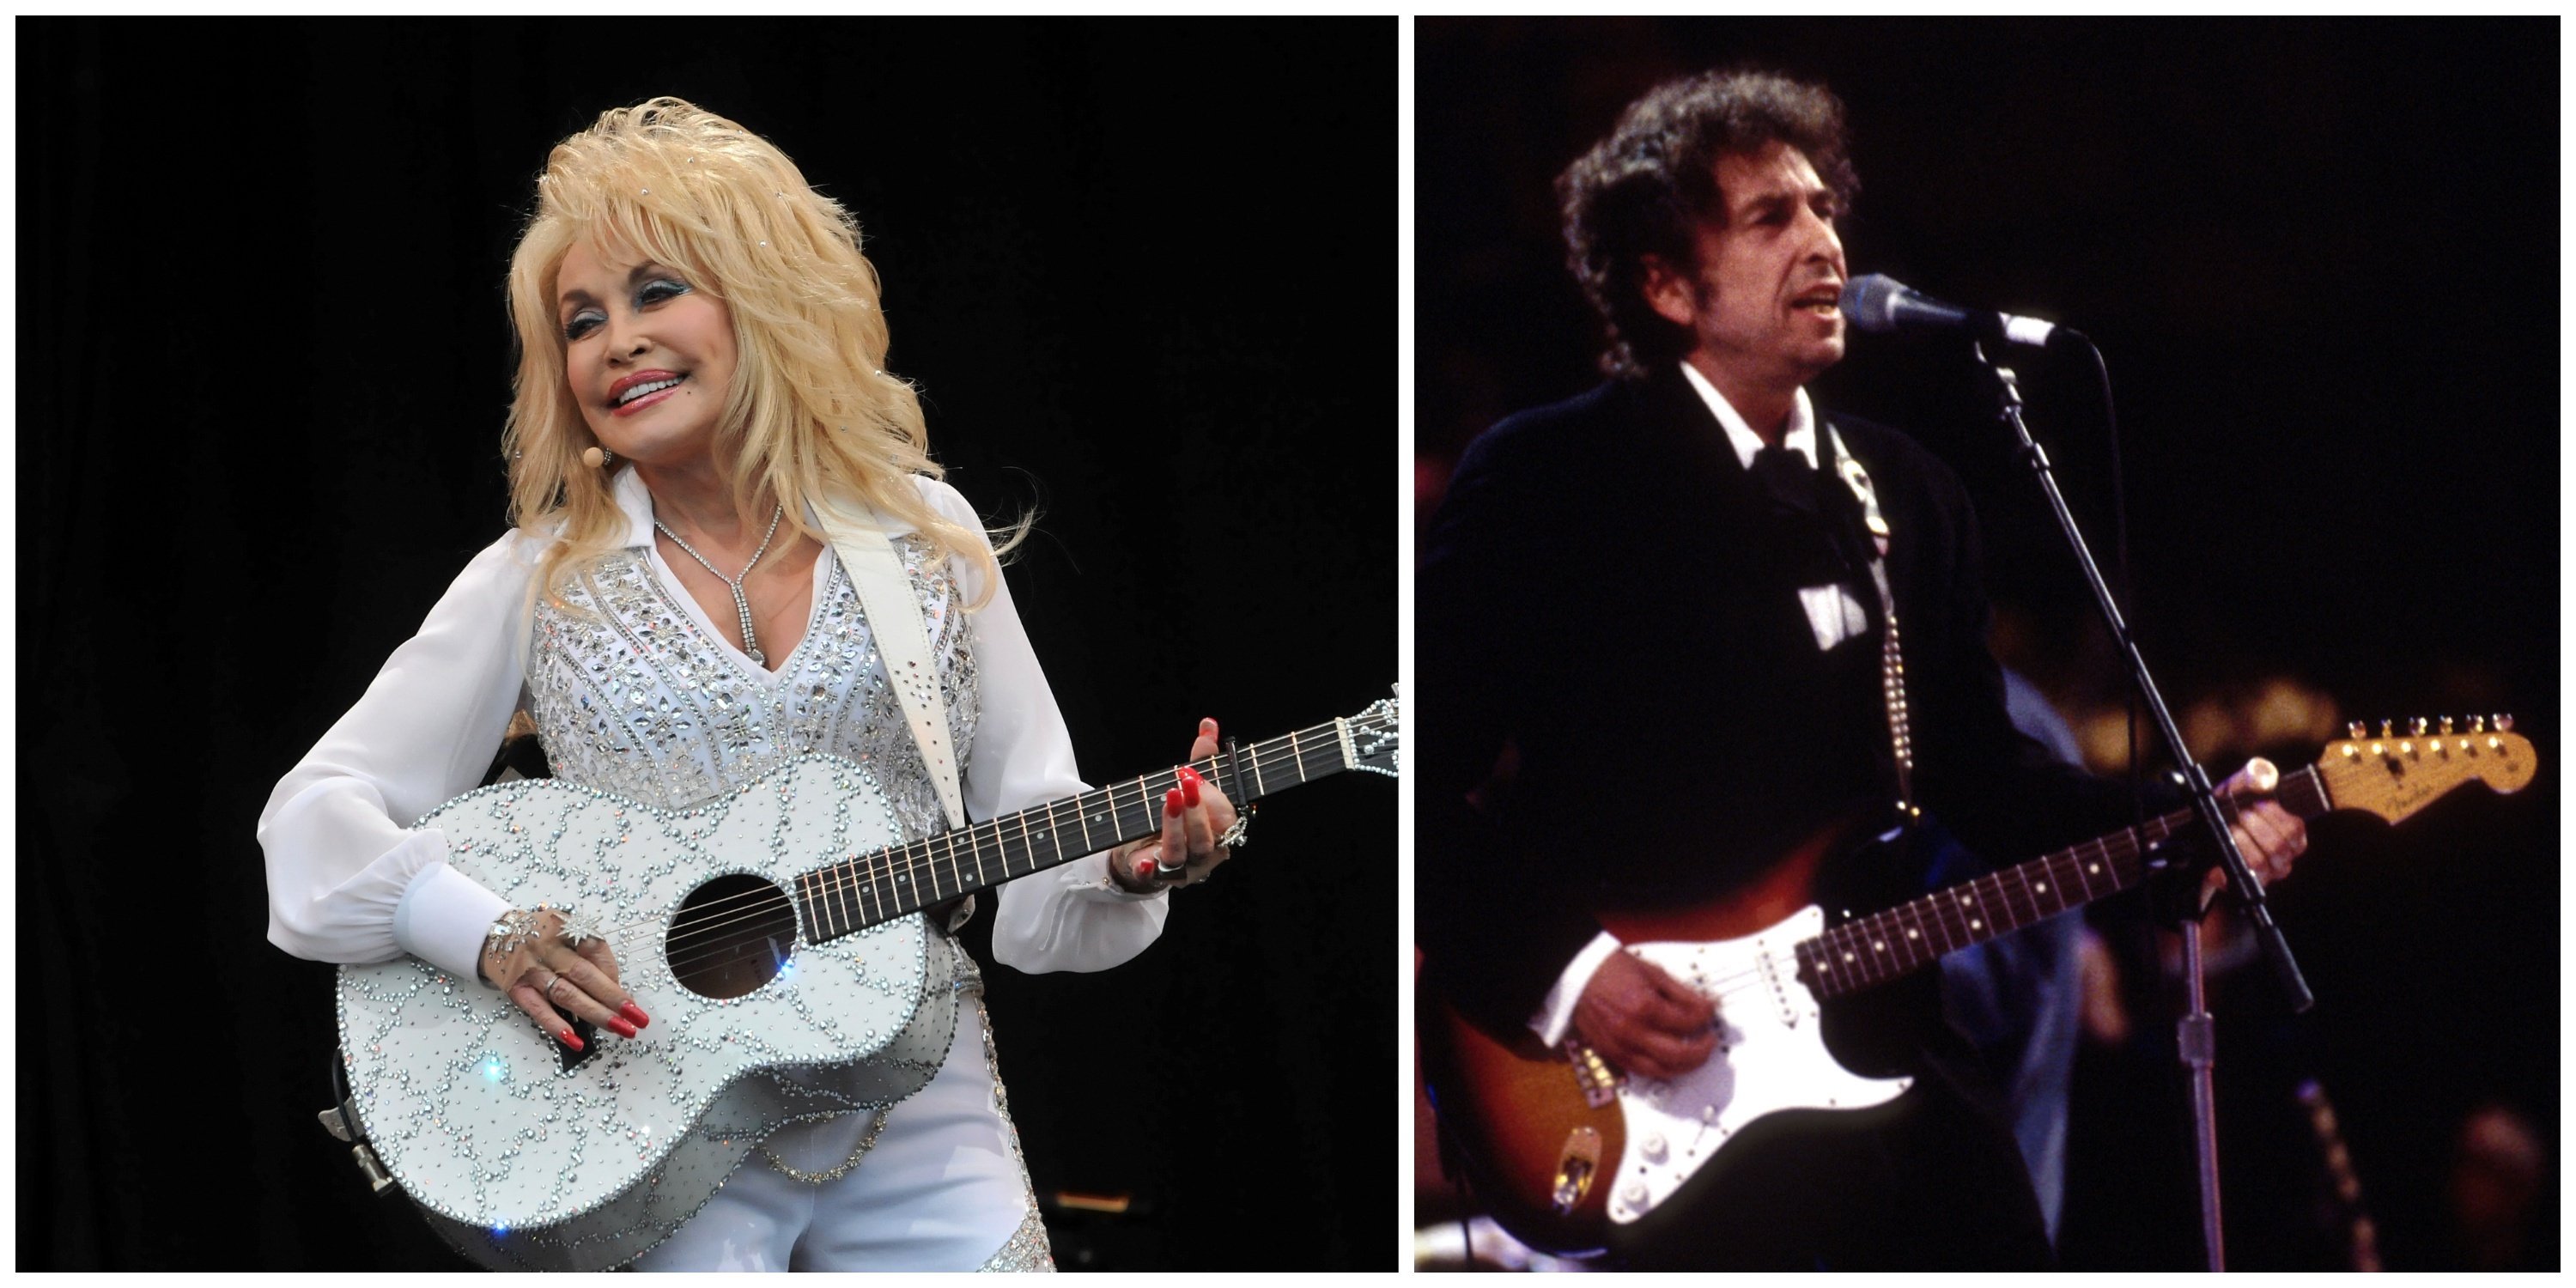 Dolly Parton and Bob Dylan performing at different concerts